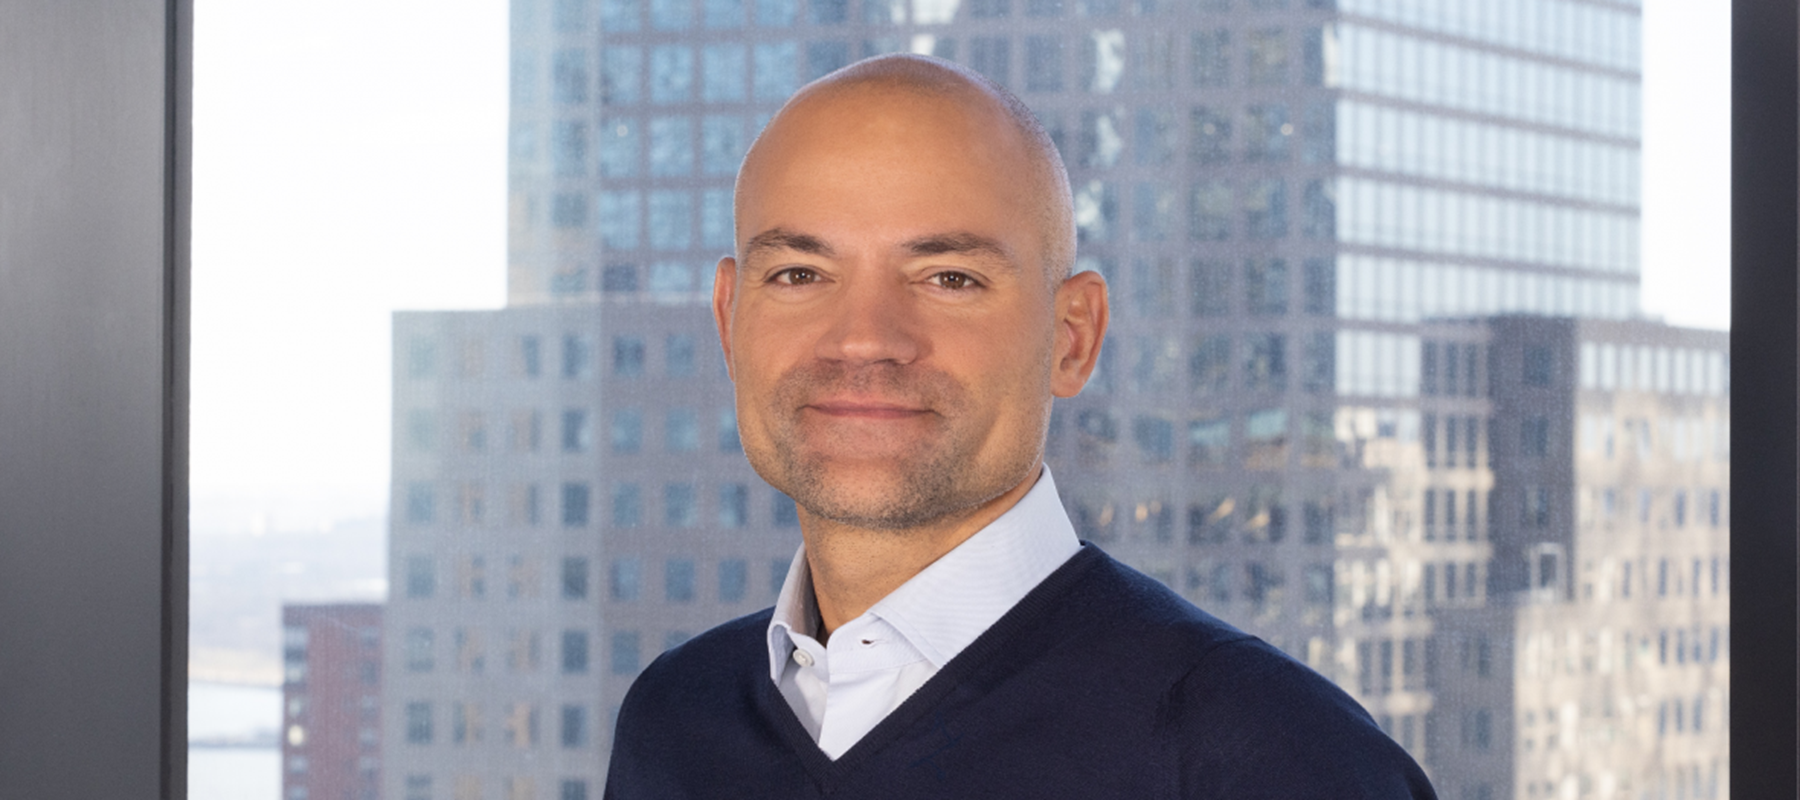 GroupM appoints Sharb Farjami CEO of North America